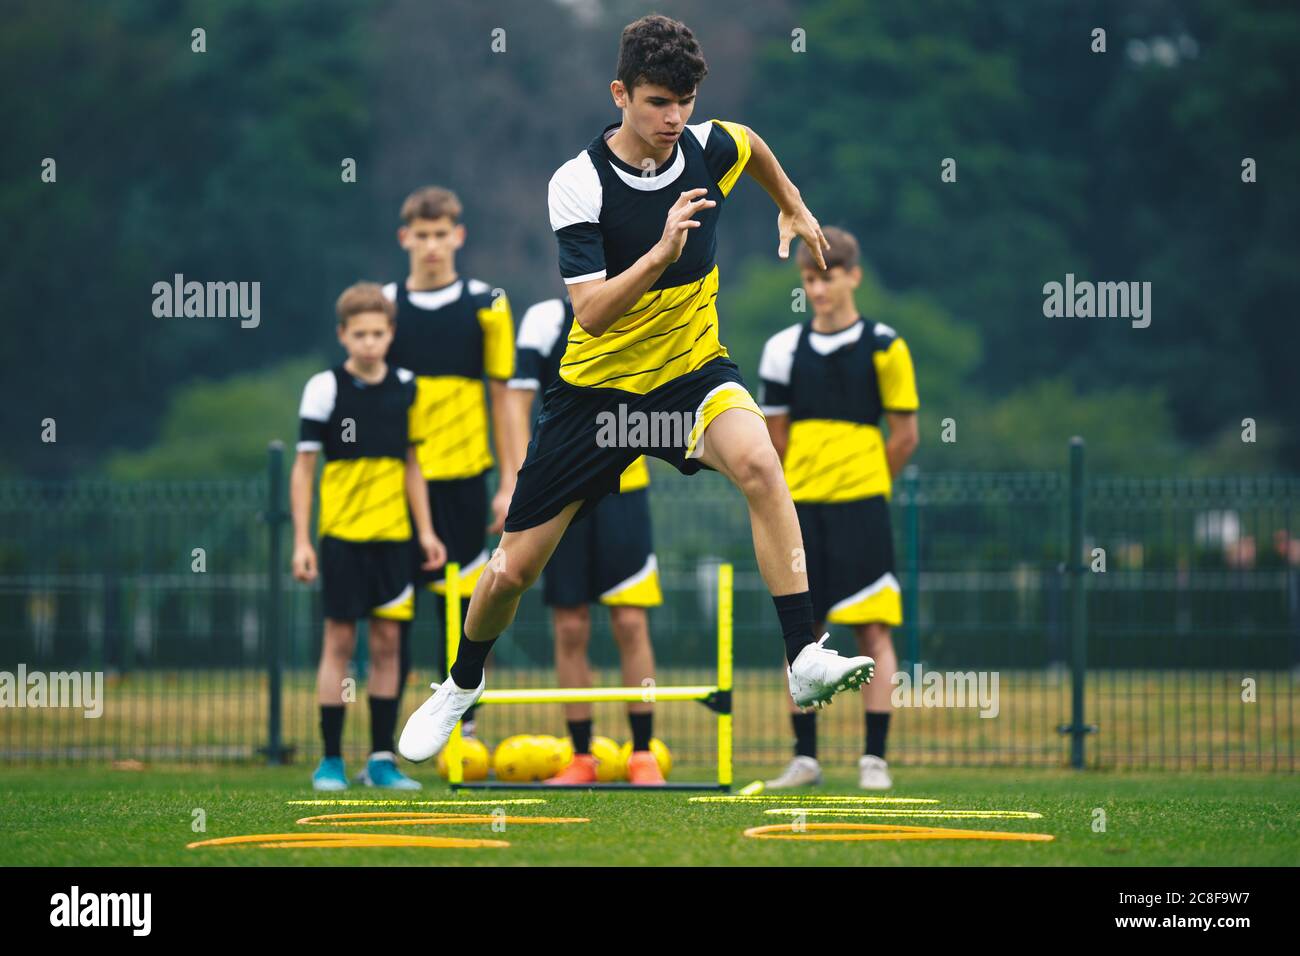 Young Footballer on Training Jumping Over Obstacles. Summer Soccer Camp. Players in a Team Practicing and Improving Speed, Strength and Agility Skills Stock Photo